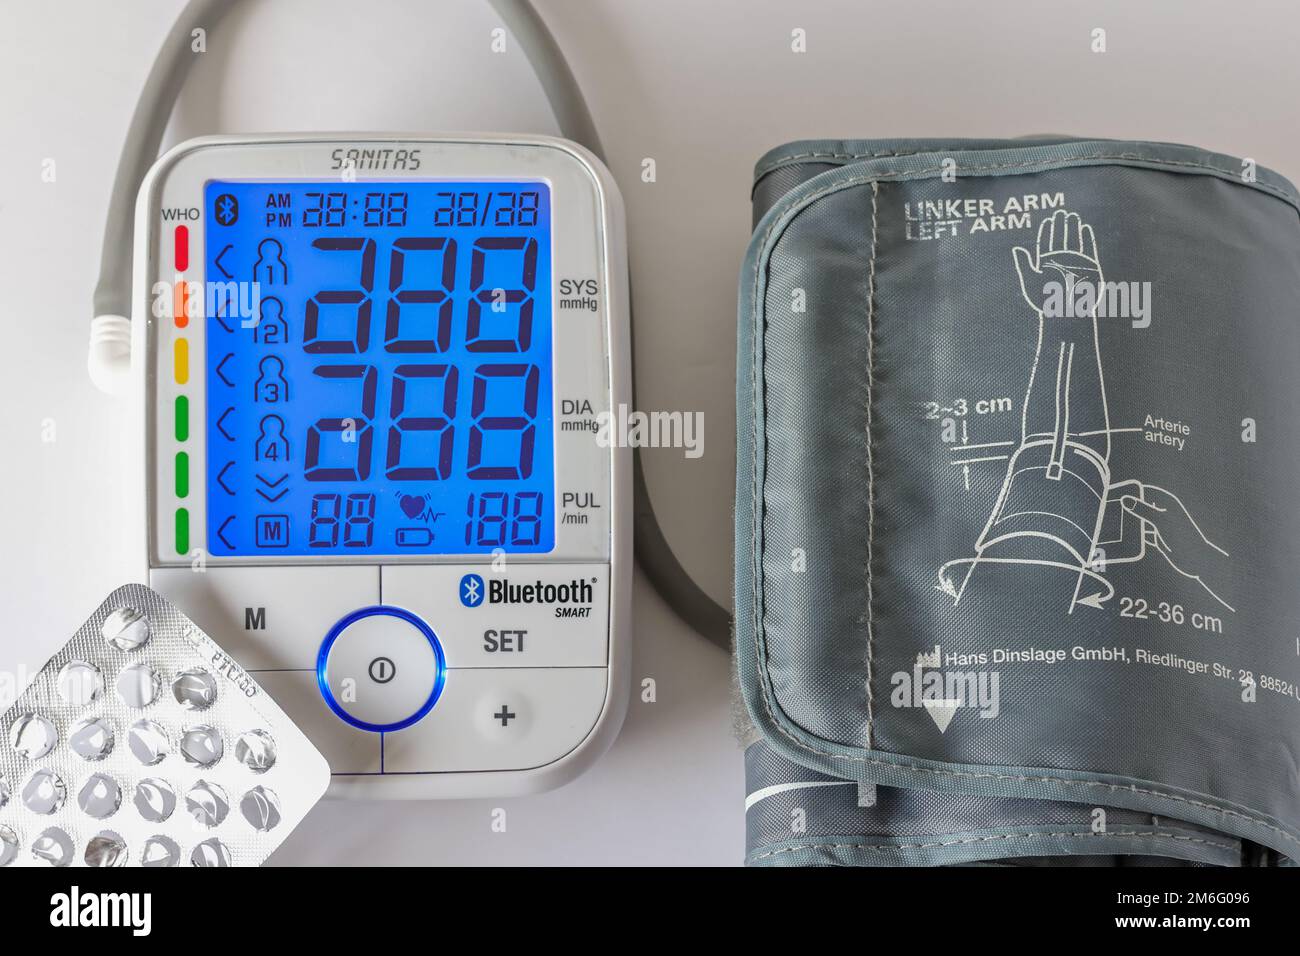 A Sanitas brand digital arm blood pressure monitor and blood pressure pills  on a white surface Stock Photo - Alamy